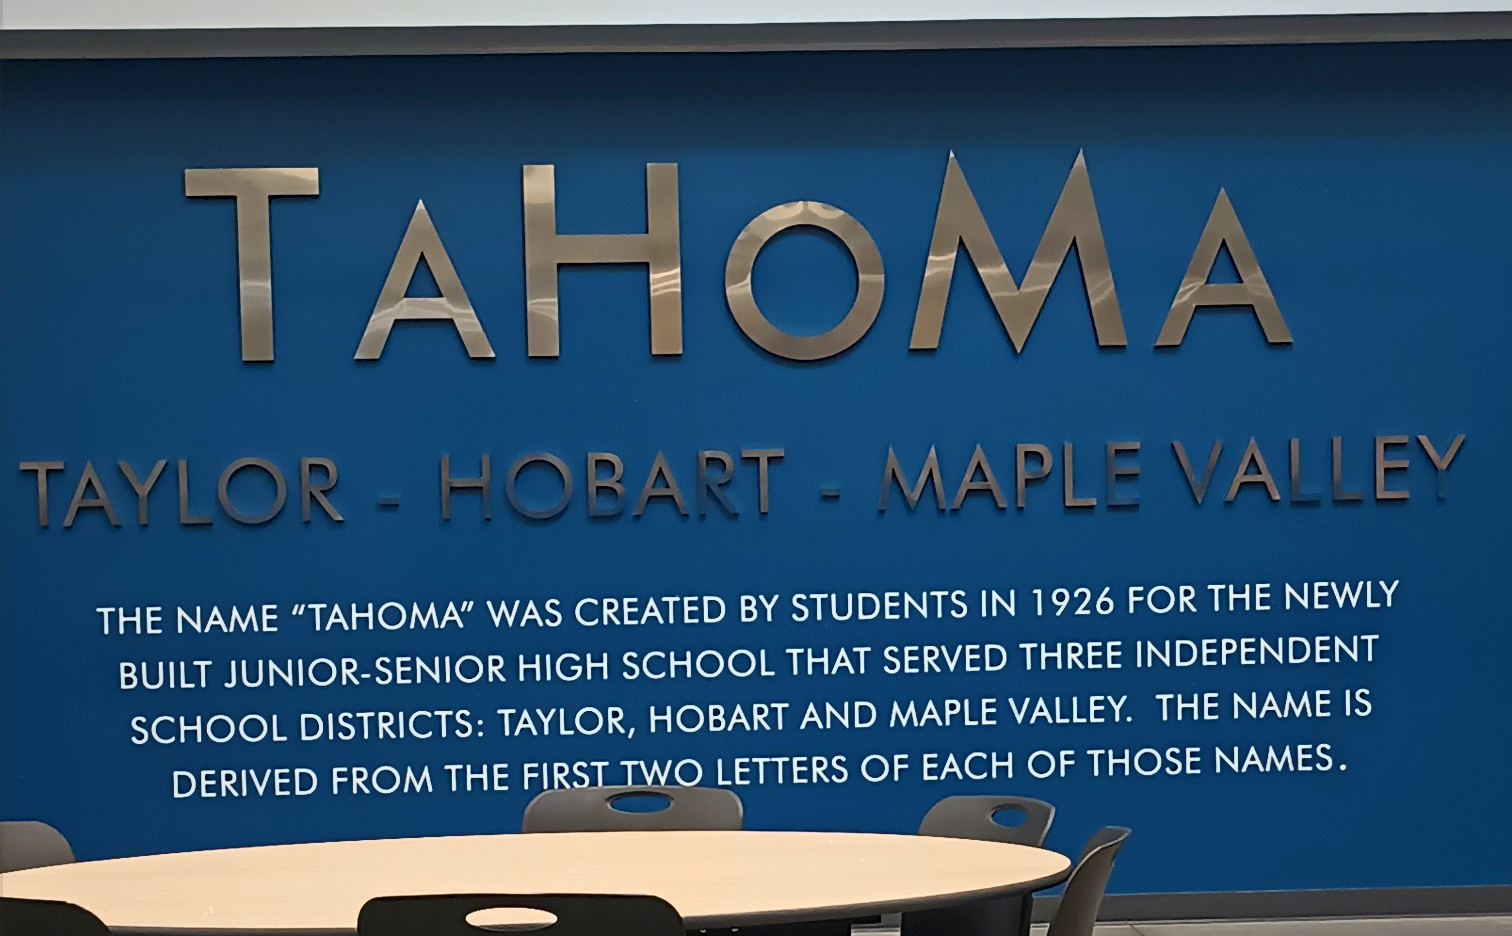 In response to Tahoma School District’s use of the Tahoma name